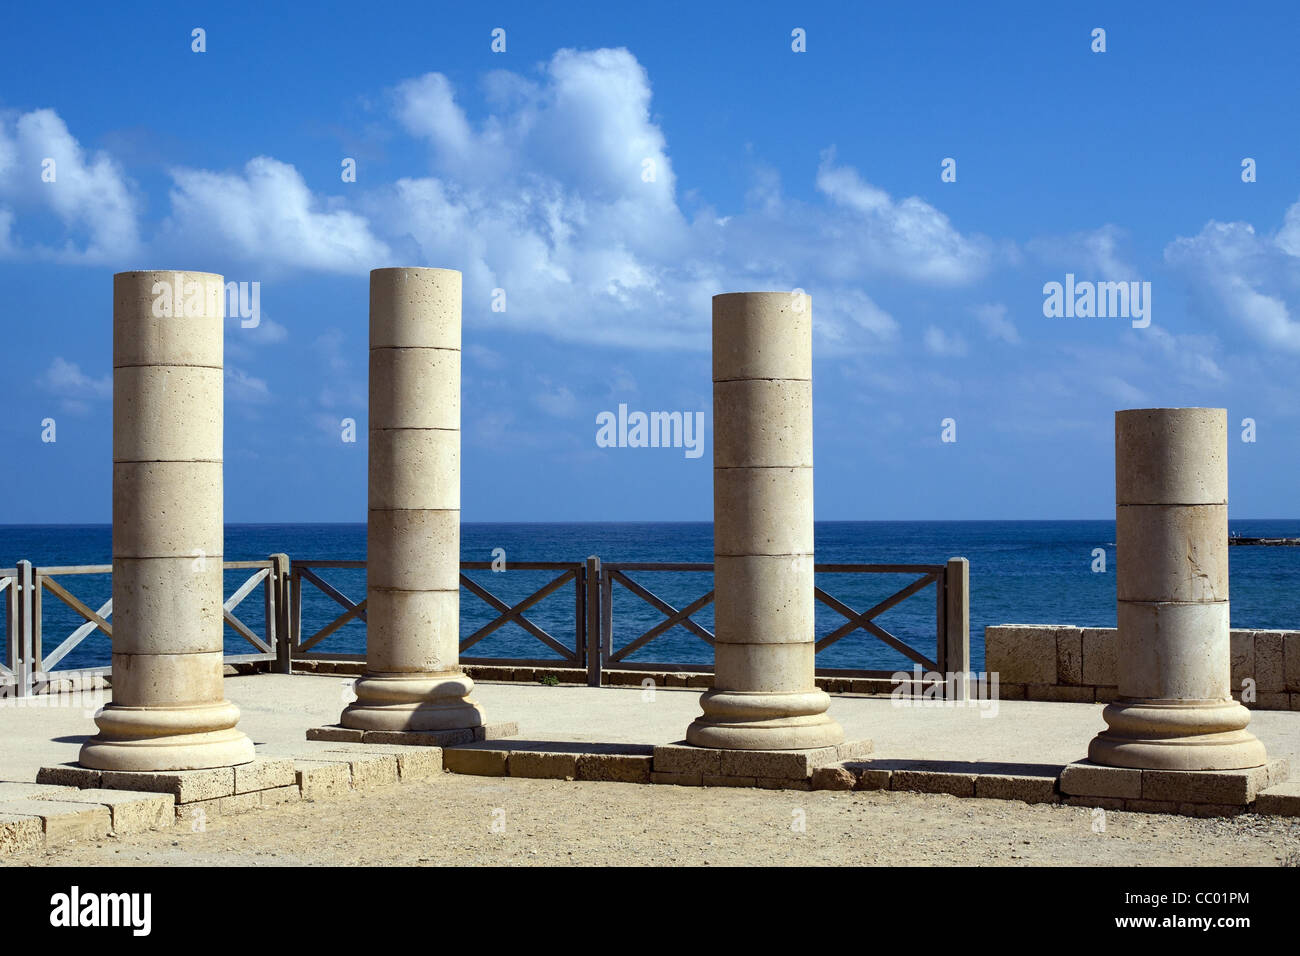 RUINS OF ROMAN COLUMNS, ARCHAEOLOGICAL SITE OF THE ANCIENT CITY OF CAESAREA, ISRAEL Stock Photo